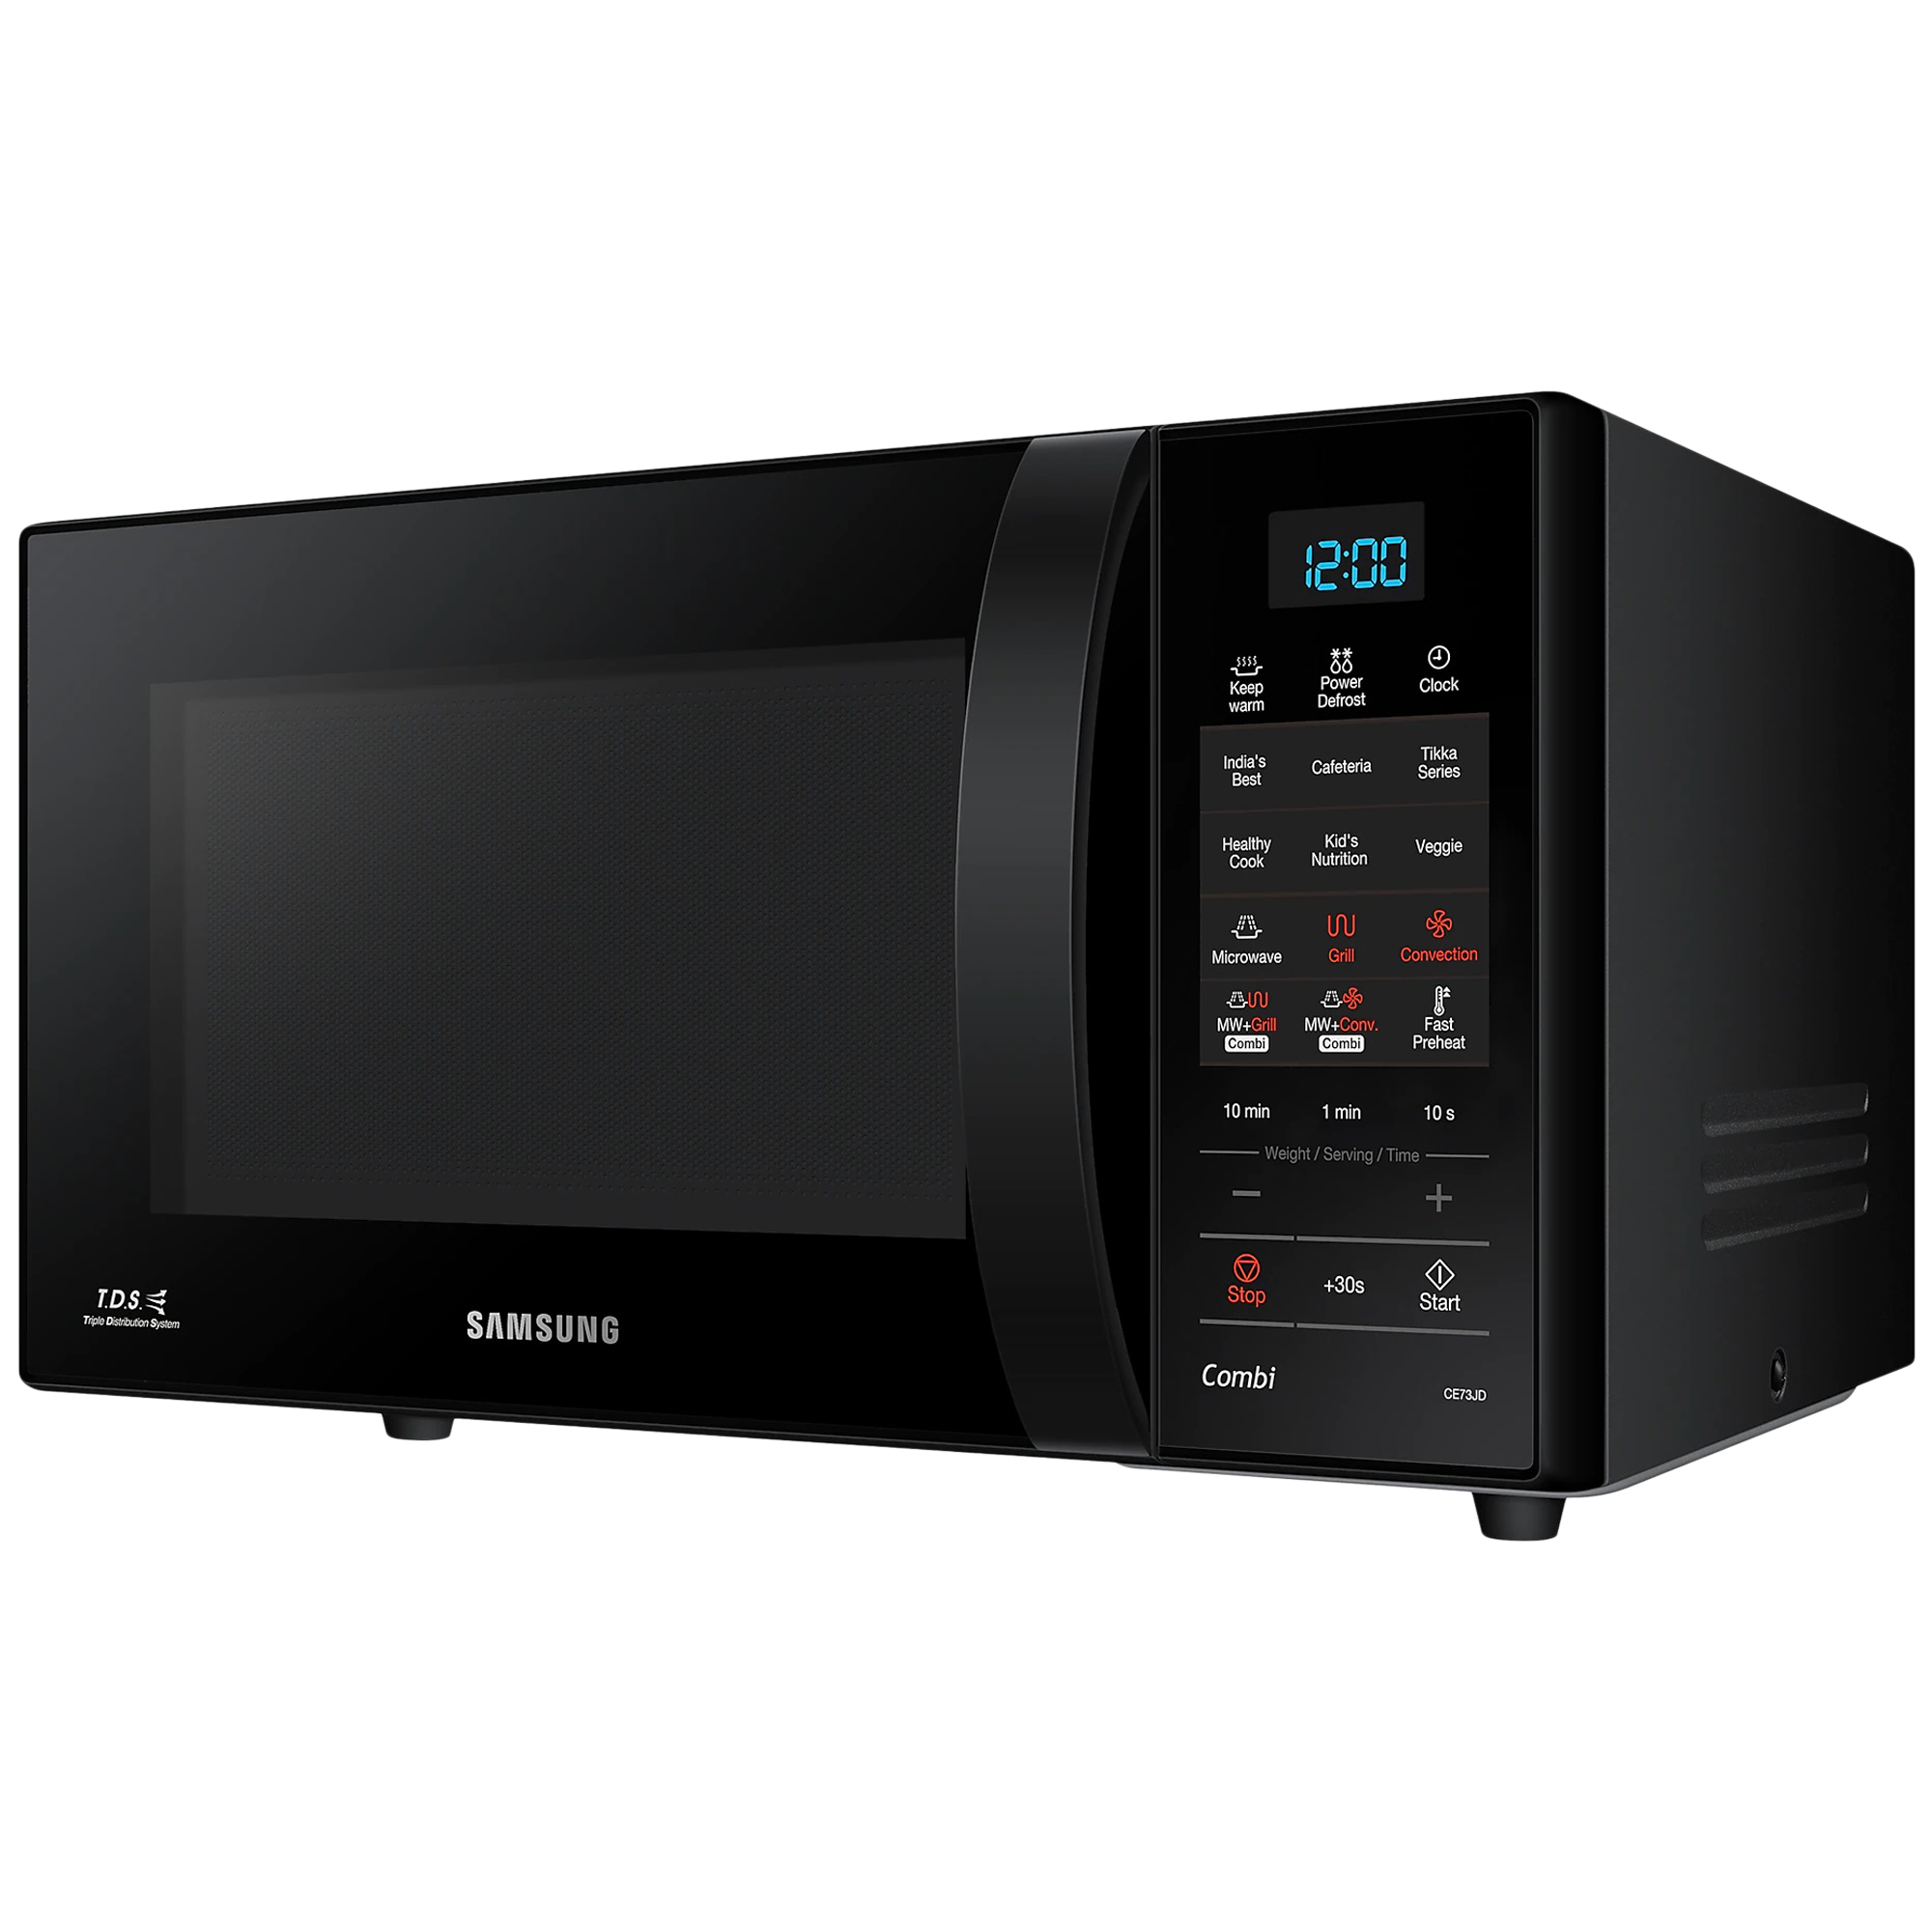 SAMSUNG 21 Litres Convection Microwave Oven (Triple Distribution System with Power Defrost, CE73JD-B1/XTL, Black)_2